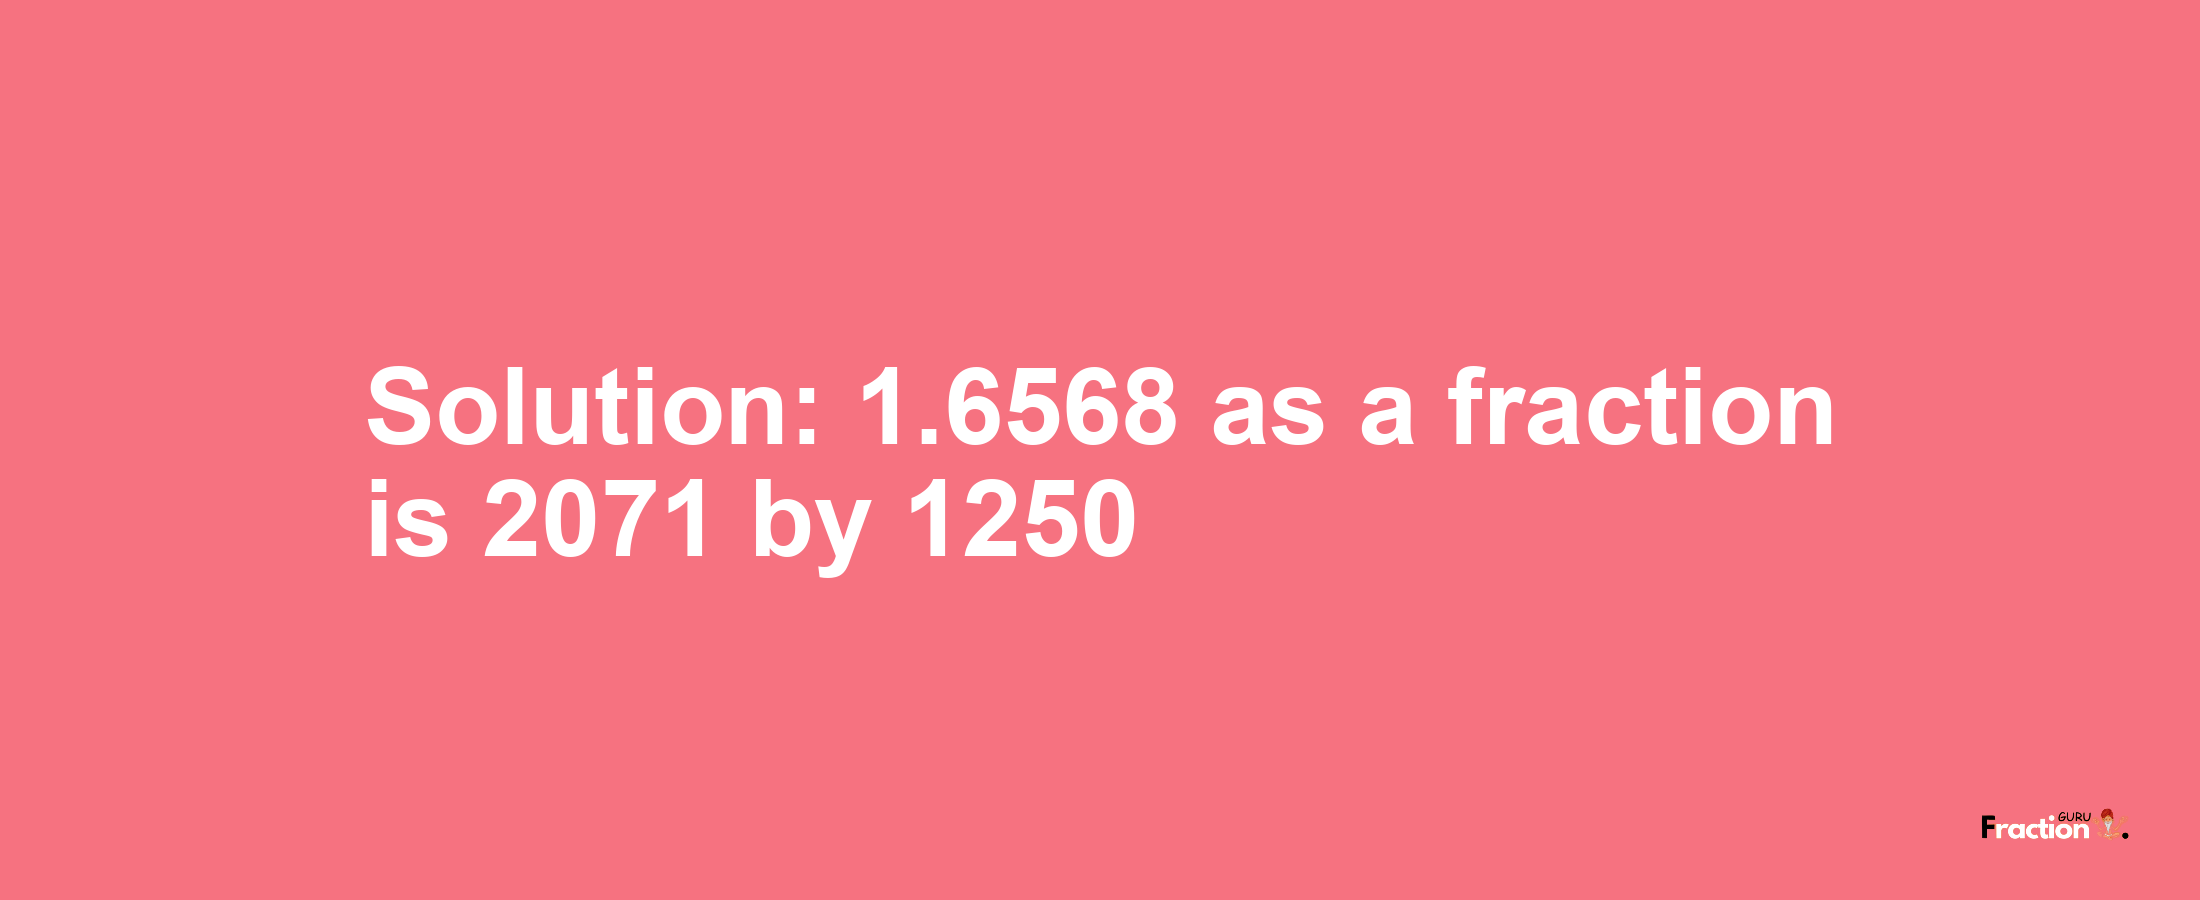 Solution:1.6568 as a fraction is 2071/1250